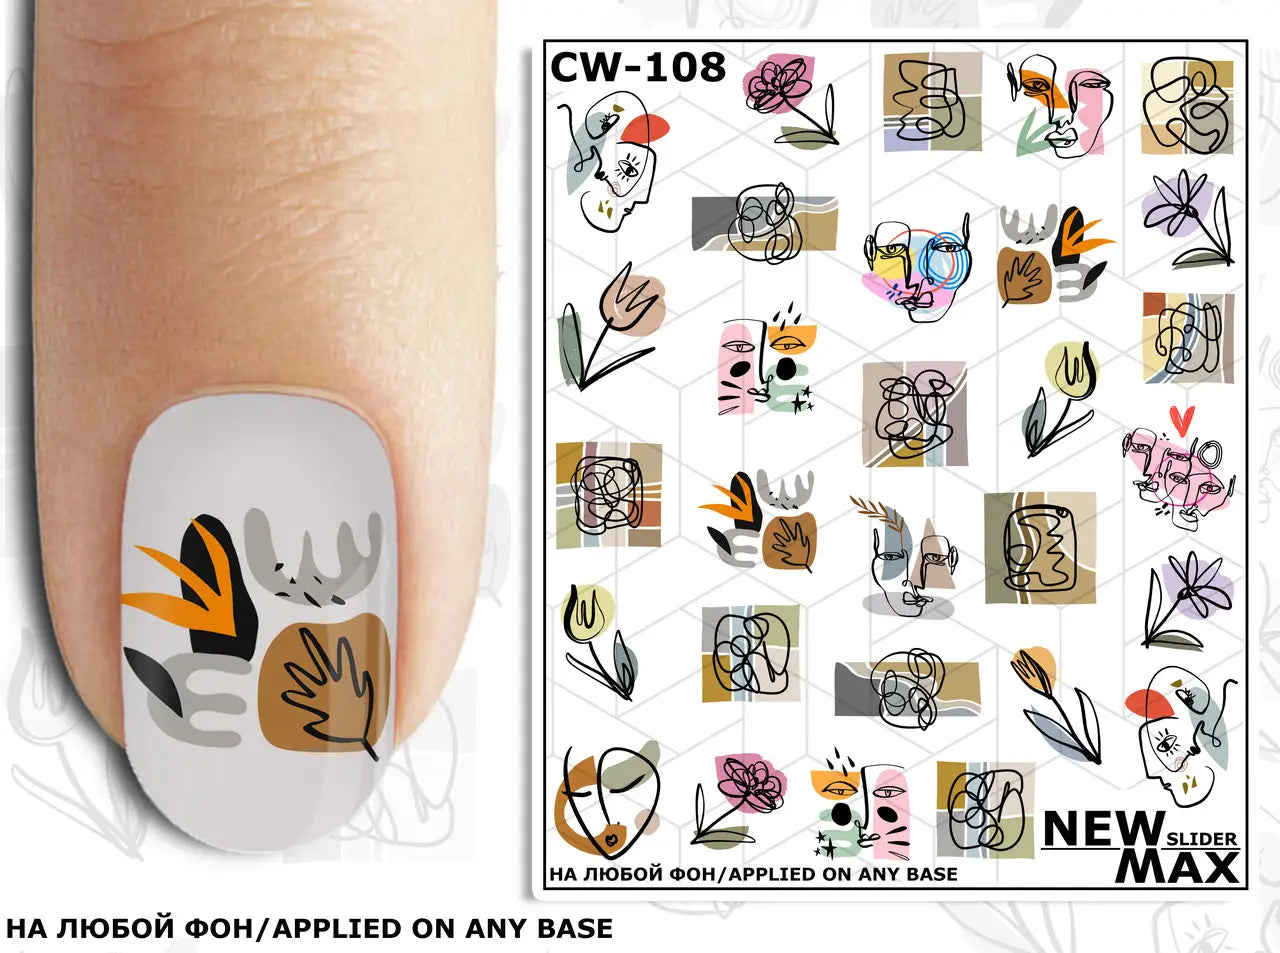 Newmaxpro Slider design for Manicure CW-108